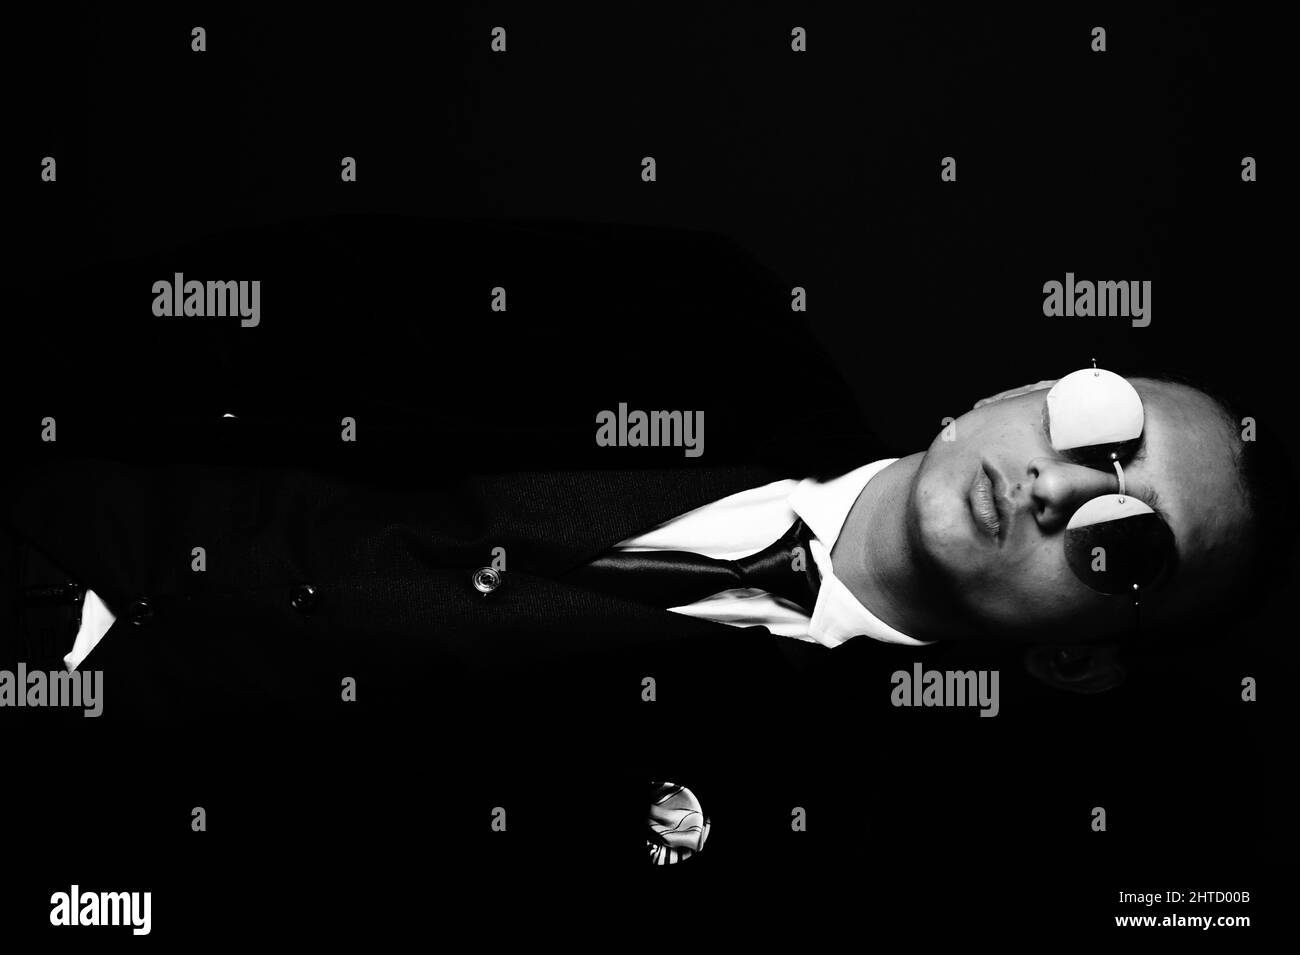 Grayscale portrait of a hip young South Asian man in a suit and sunglasses against a dark background Stock Photo